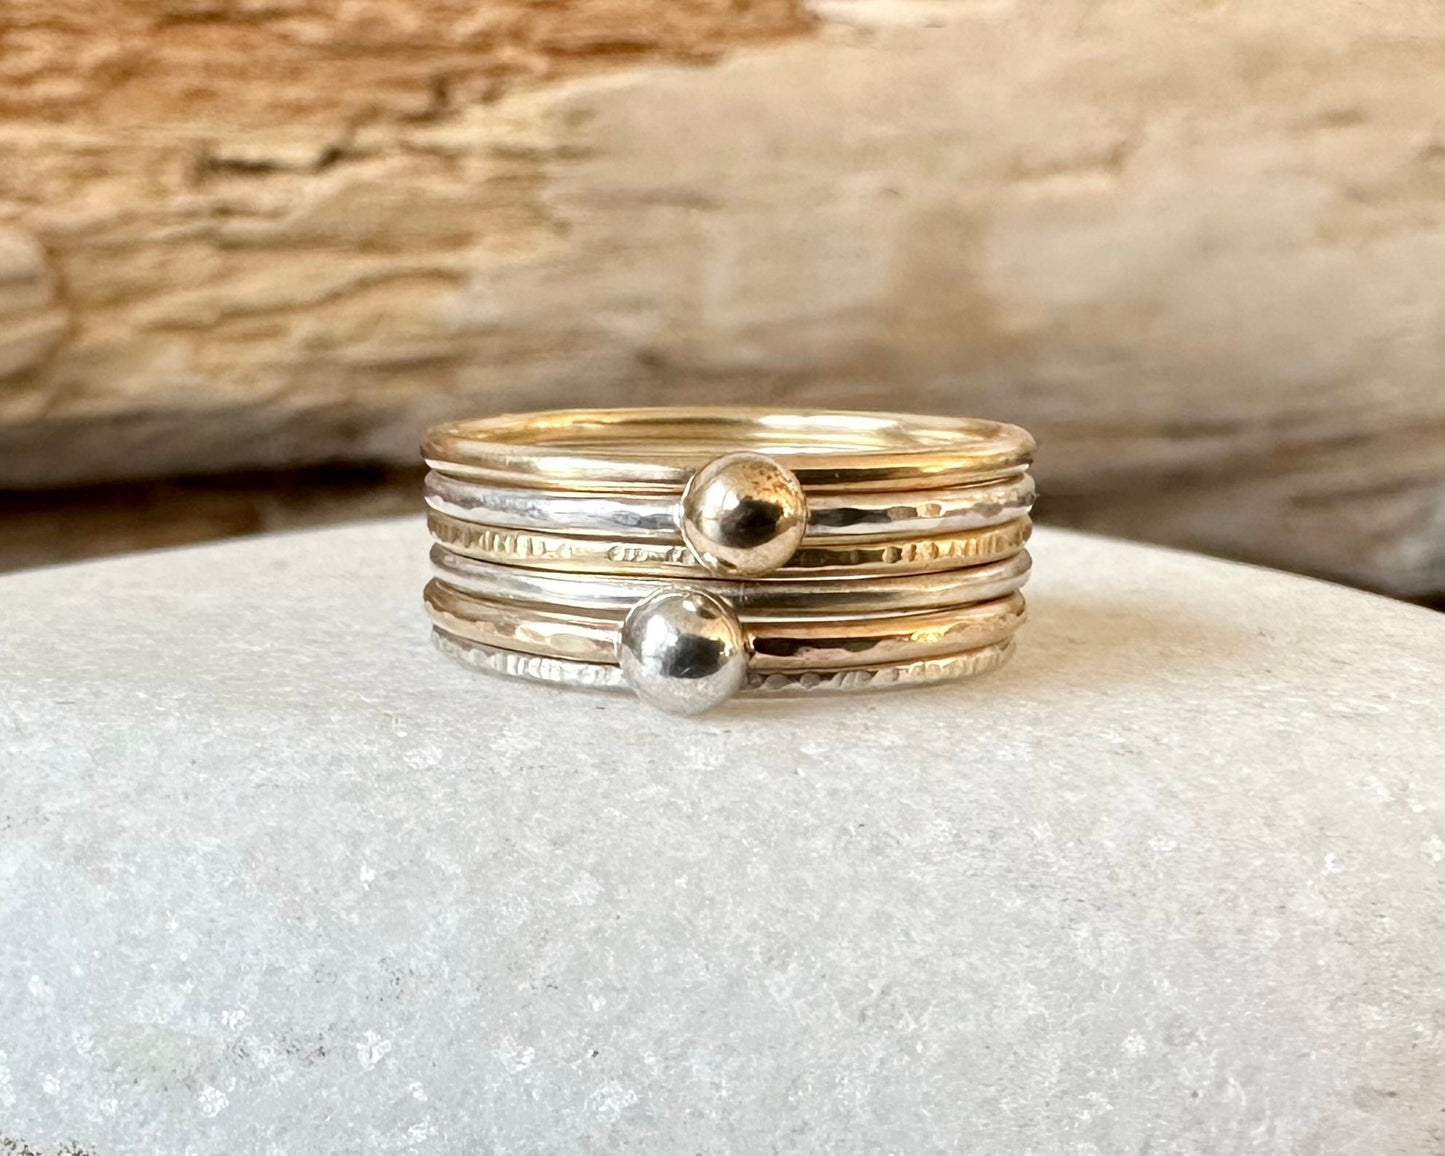 Set of Six Gold and Silver Skinny Stacking Rings, 9ct Gold, 925 Sterling Silver, Nugget Rings, Pebble Rings, Stacking Ring Set